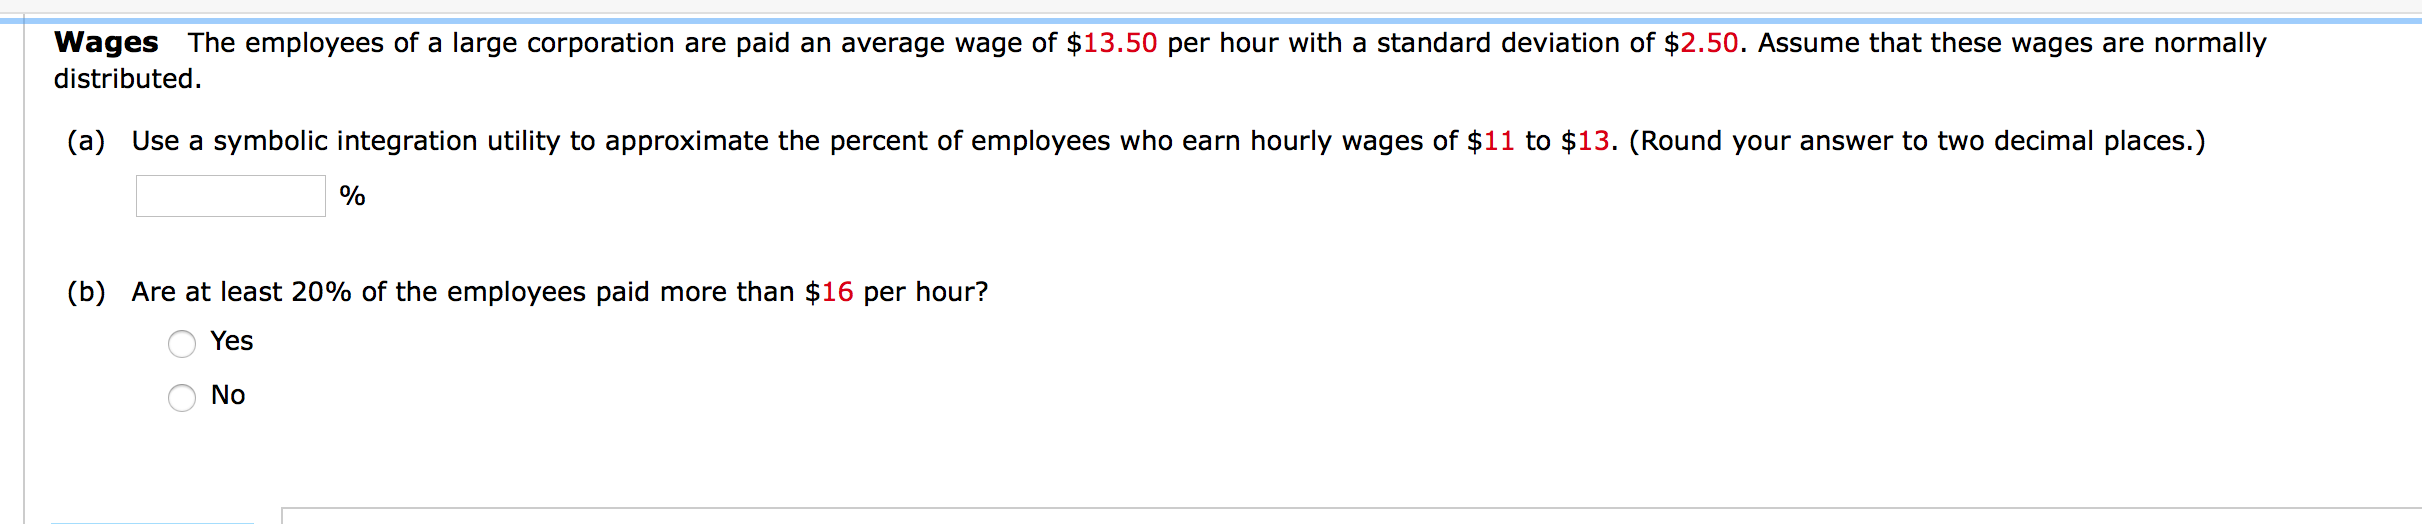 Wages The employees of a large corporation are paid an average wage of $13.50 per hour with a standard deviation of $2.50. Assume that these wages are normally
distributed.
(a) Use a symbolic integration utility to approximate the percent of employees who earn hourly wages of $11 to $13. (Round your answer to two decimal places.)
%
